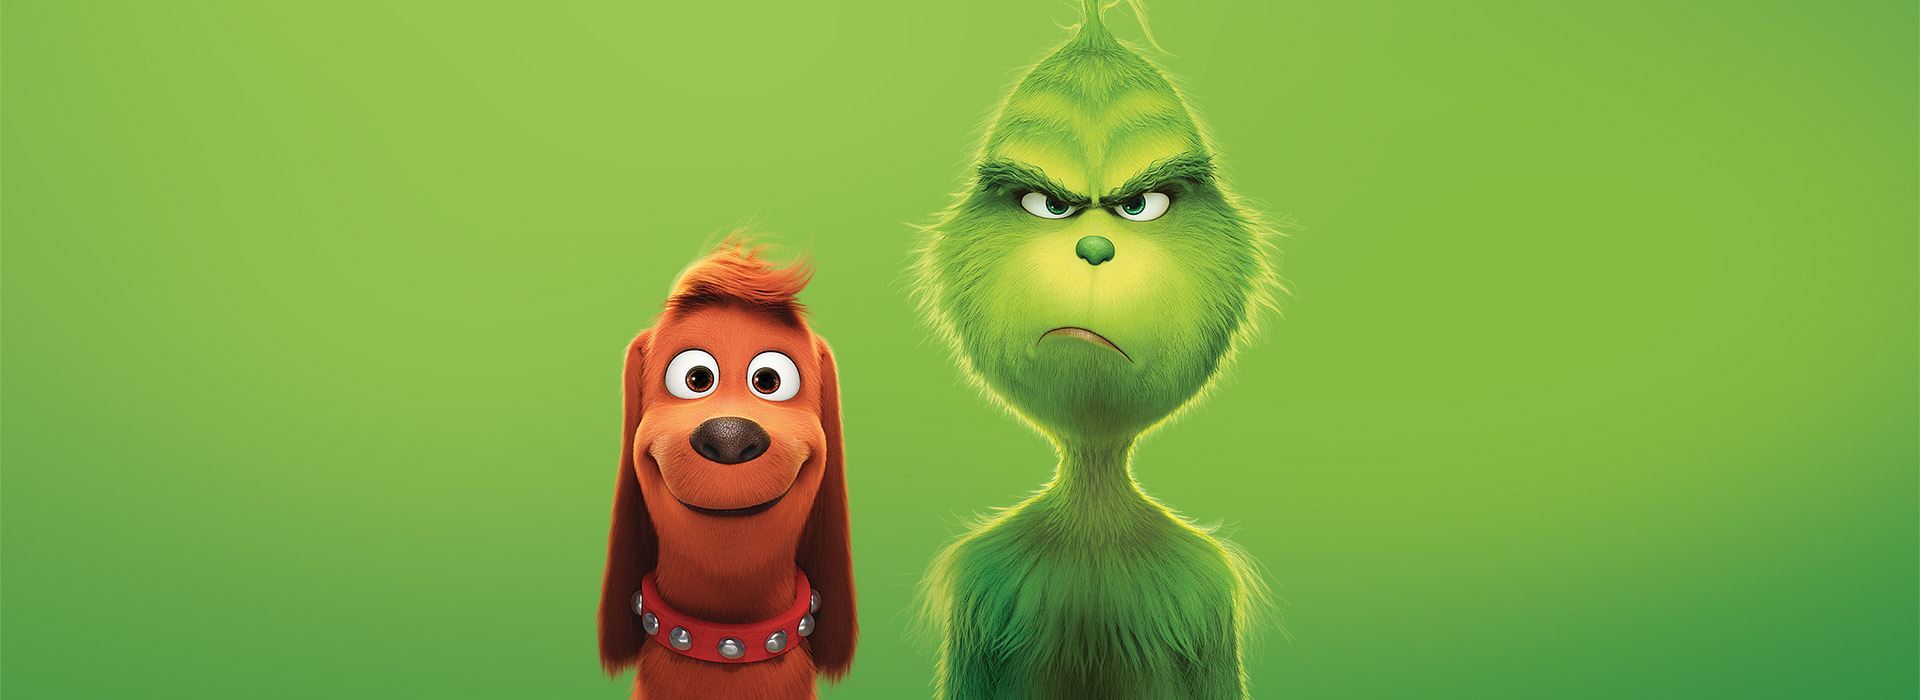 Movie poster The Grinch